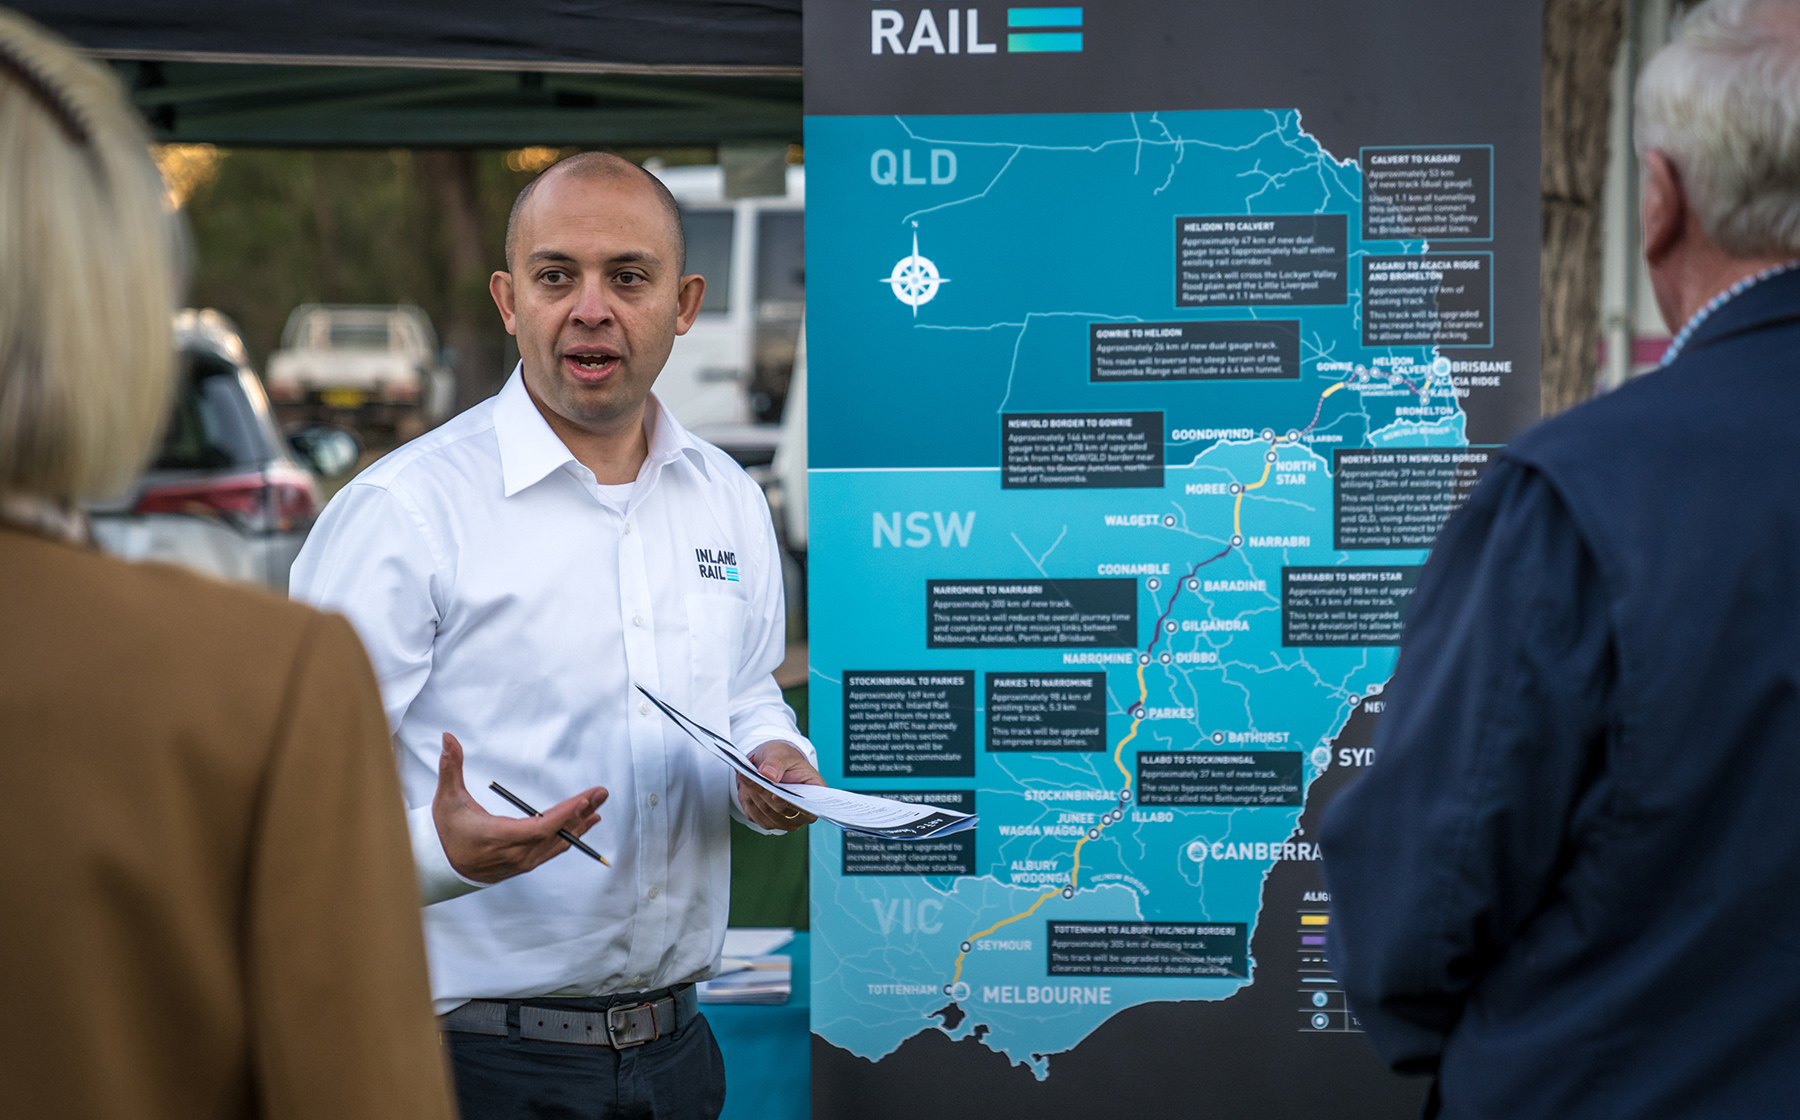 Patricio Munoz, Stakeholder Engagement Manager (North), at the 2019 Coonamble Show, New South Wales.